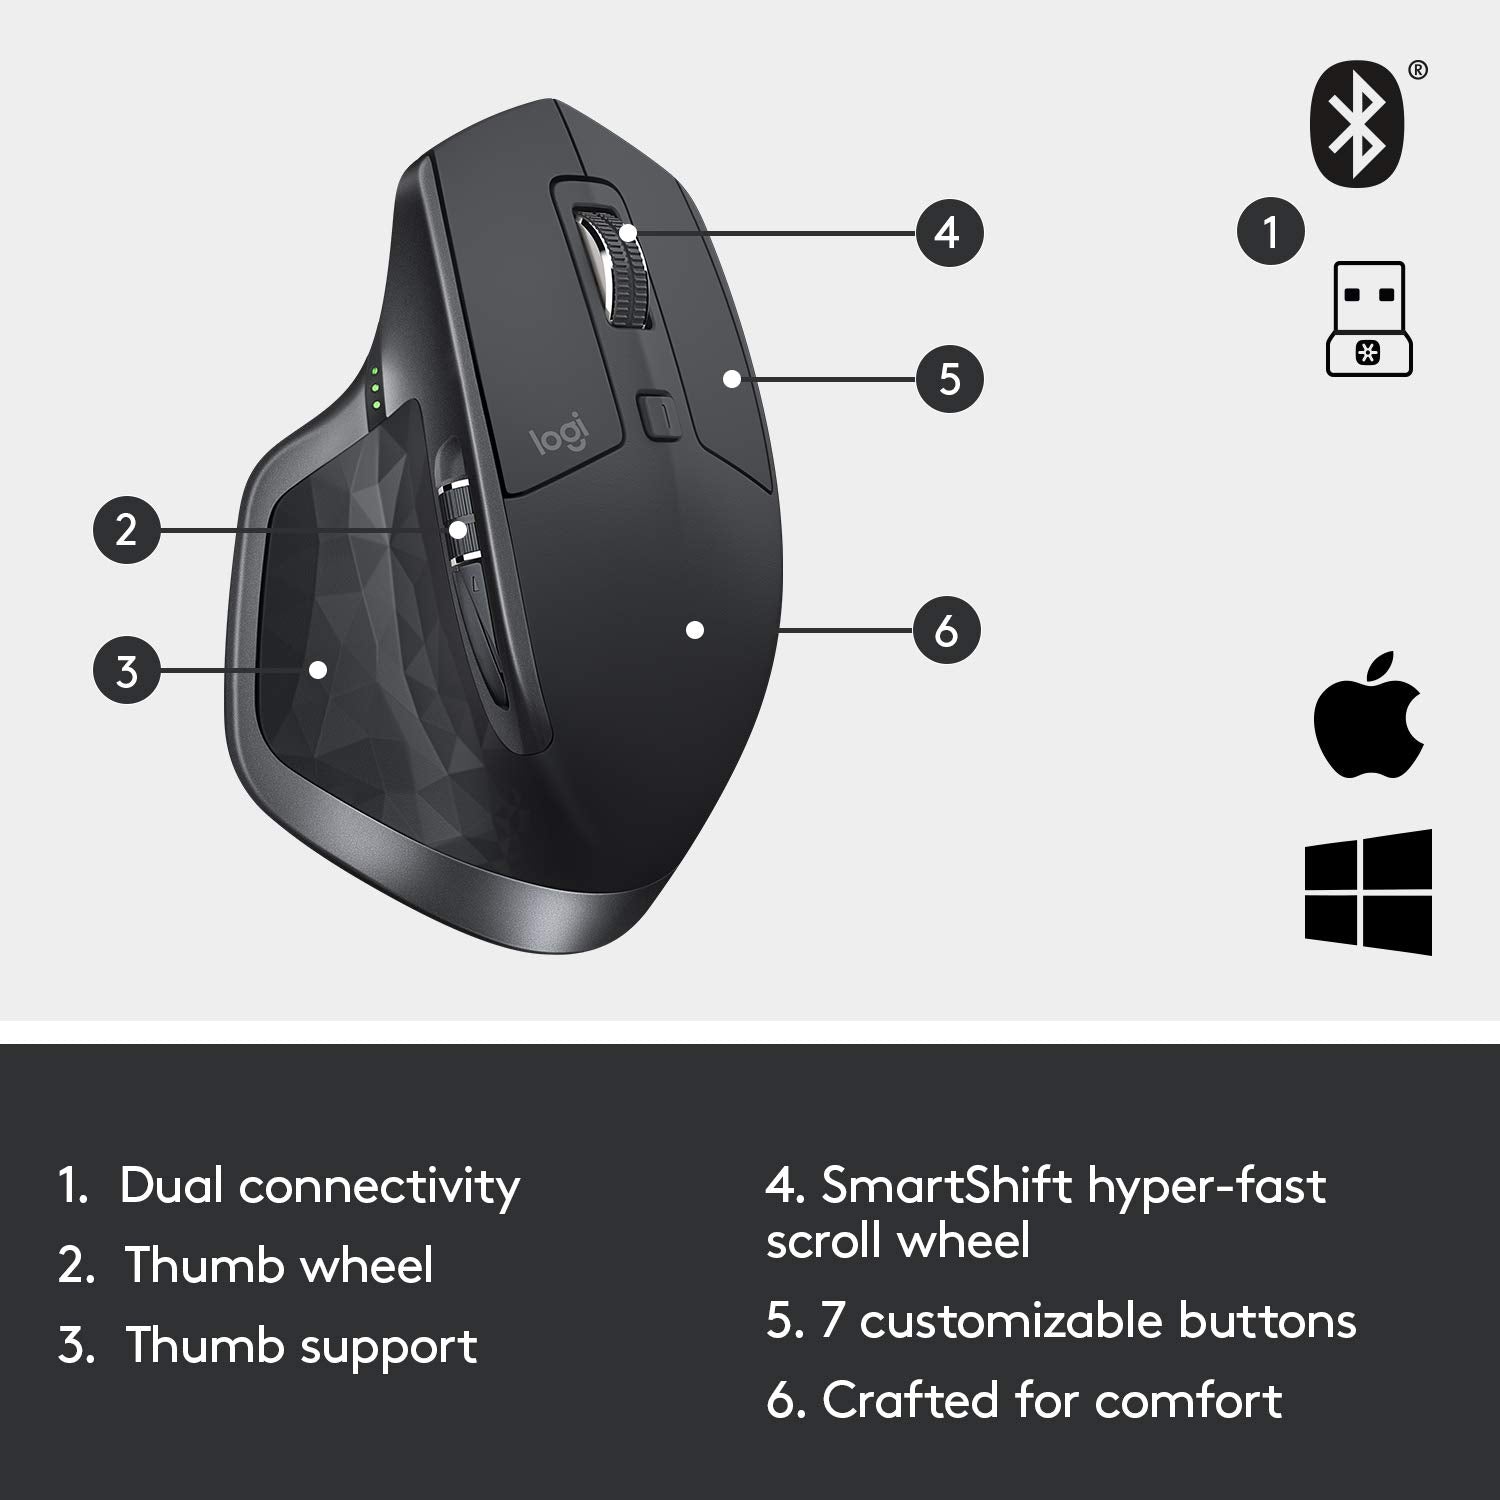 Logitech MX Master 2S Wireless Mouse, Multi-Device, Bluetooth or 2.4GHz Wireless with USB Unifying Receiver, 4000 DPI Any Surface Tracking - Black